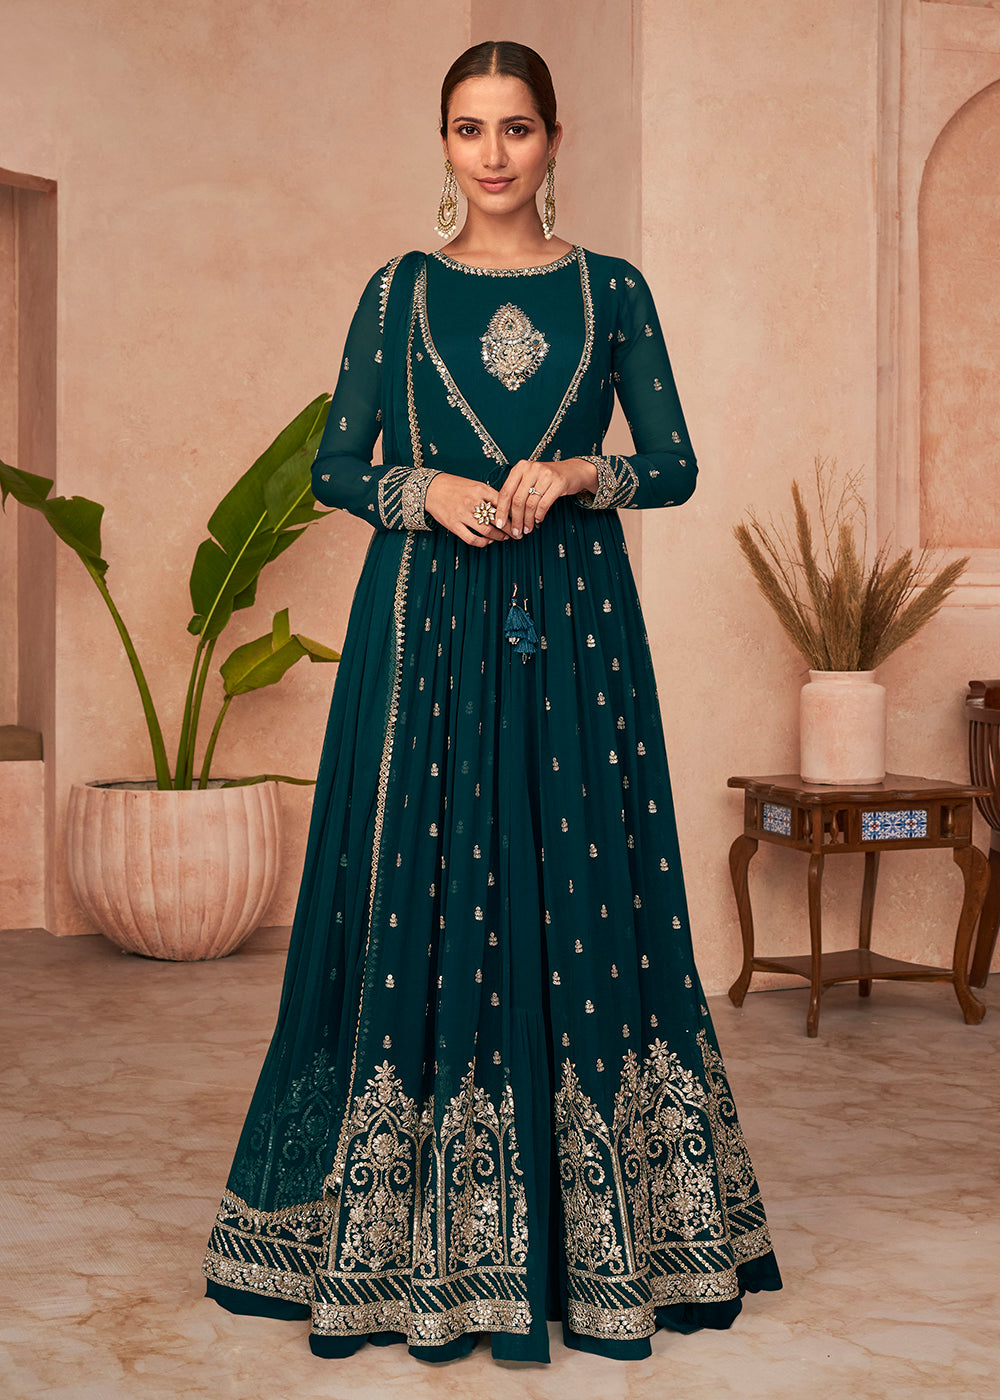 Buy Now Jacket Style Coral Blue Mirror Work Bridesmaid Style Anarkali Gown Online in USA, UK, Australia, New Zealand, Canada & Worldwide at Empress Clothing.